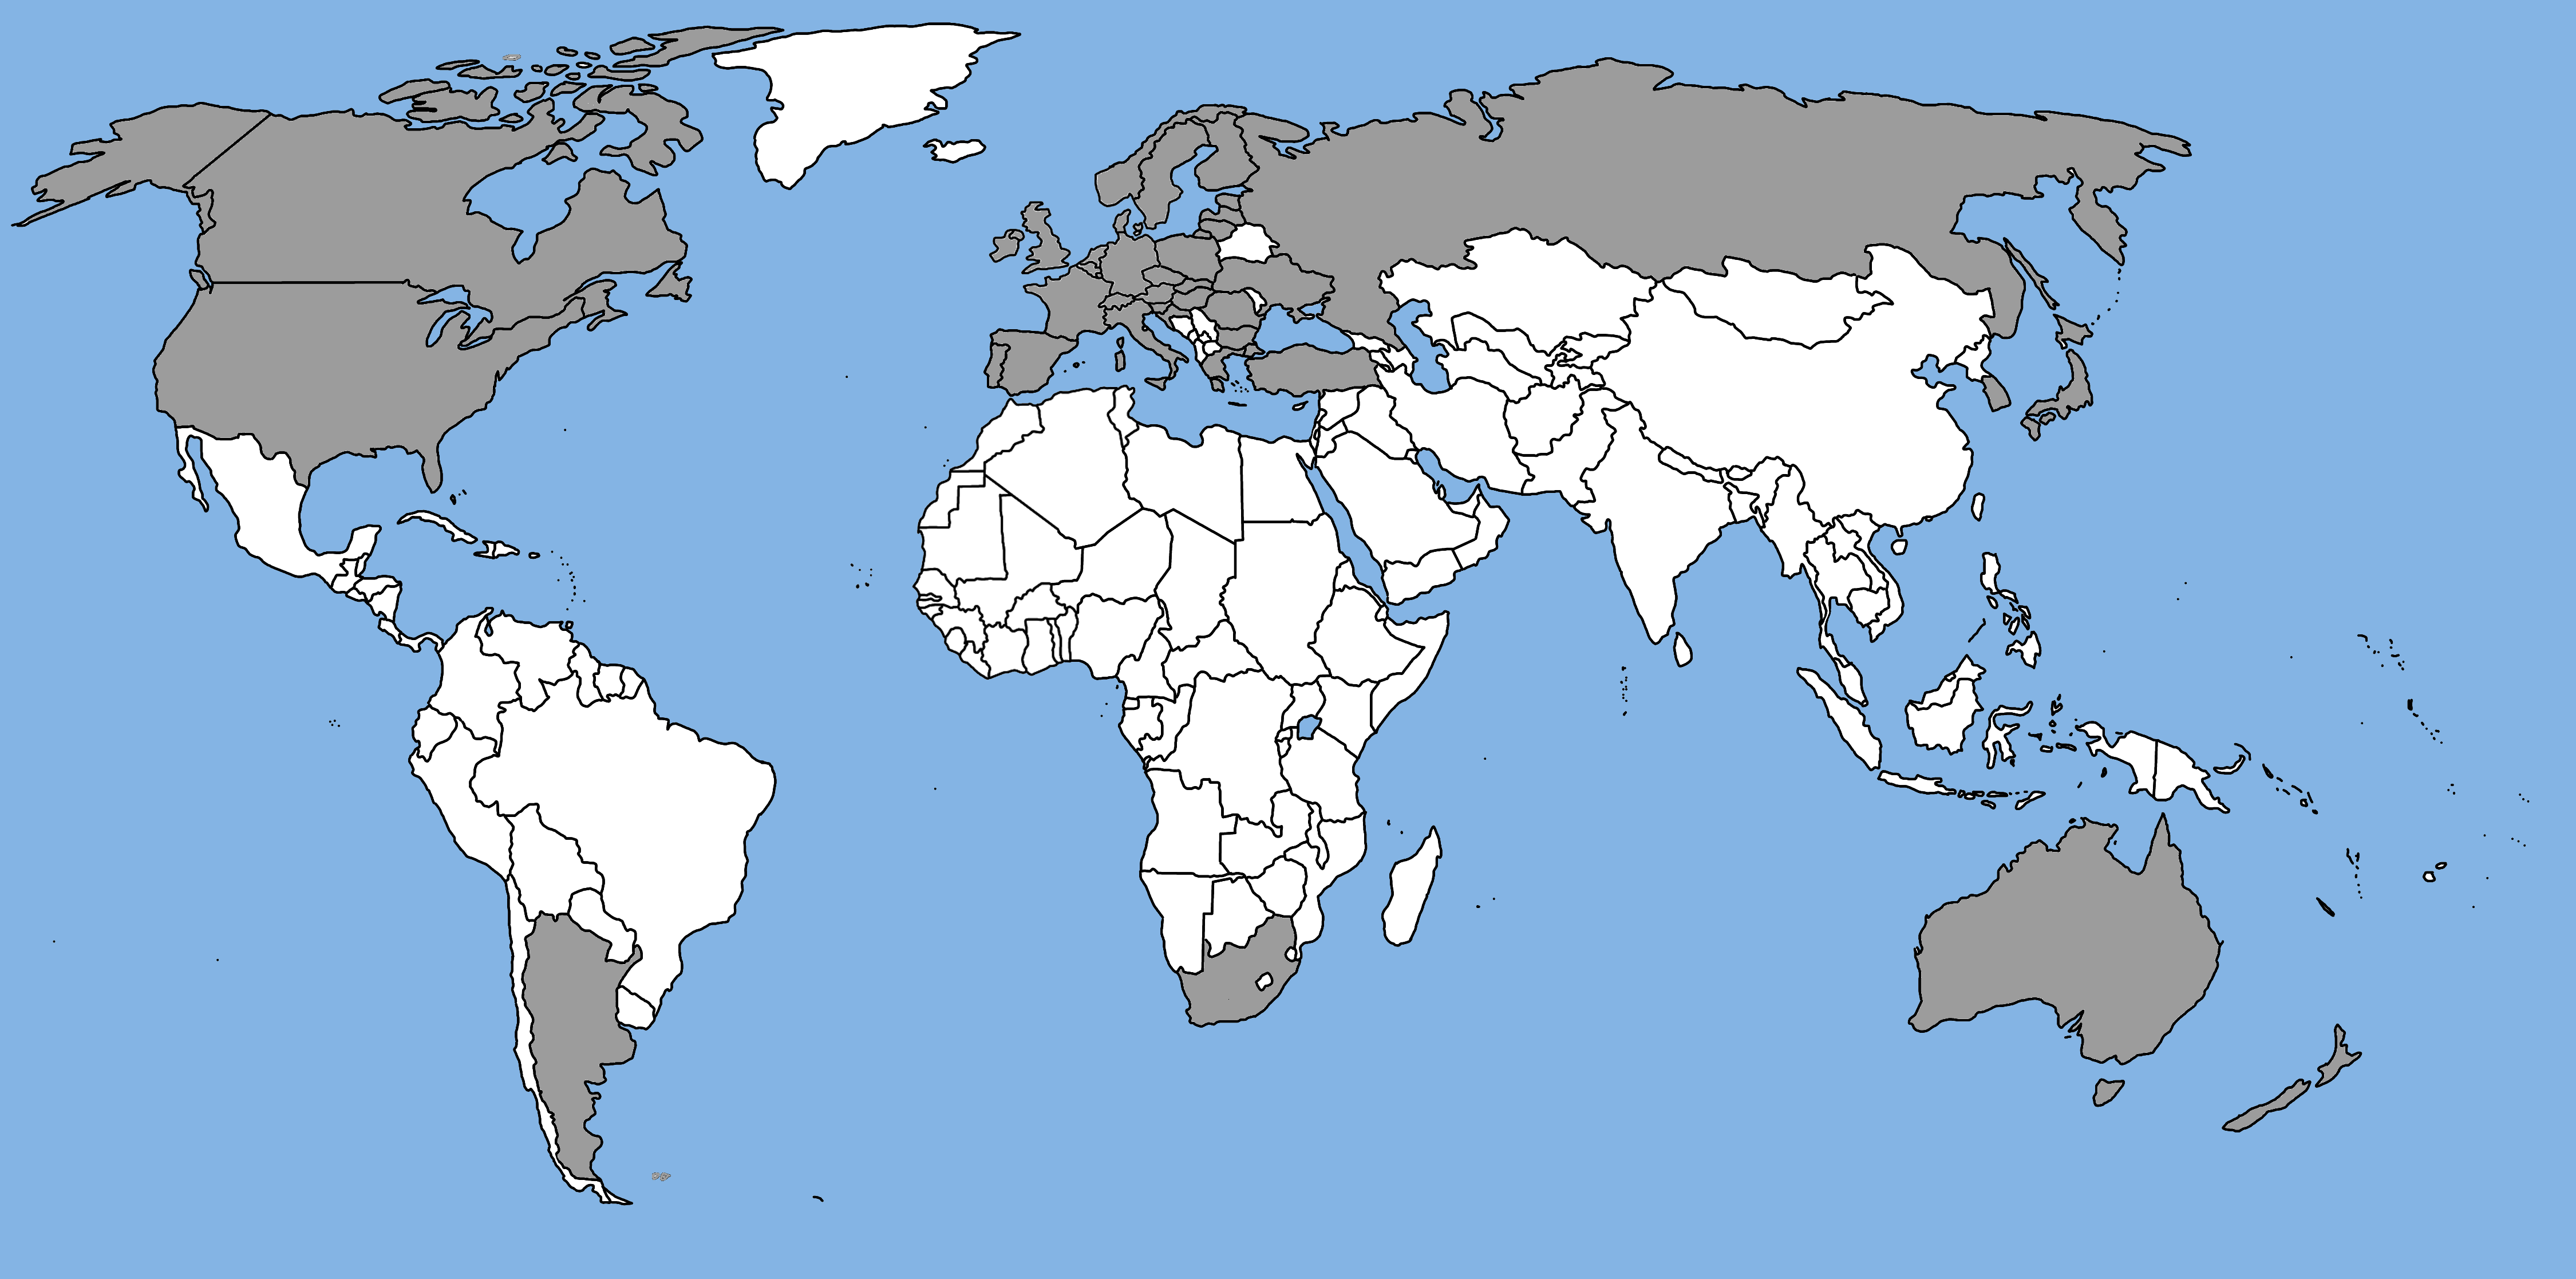 Participating nations in the Wassenaar Arrangement marked in grey. Now we can include India to the list. (Source: Wikimedia Commons) 